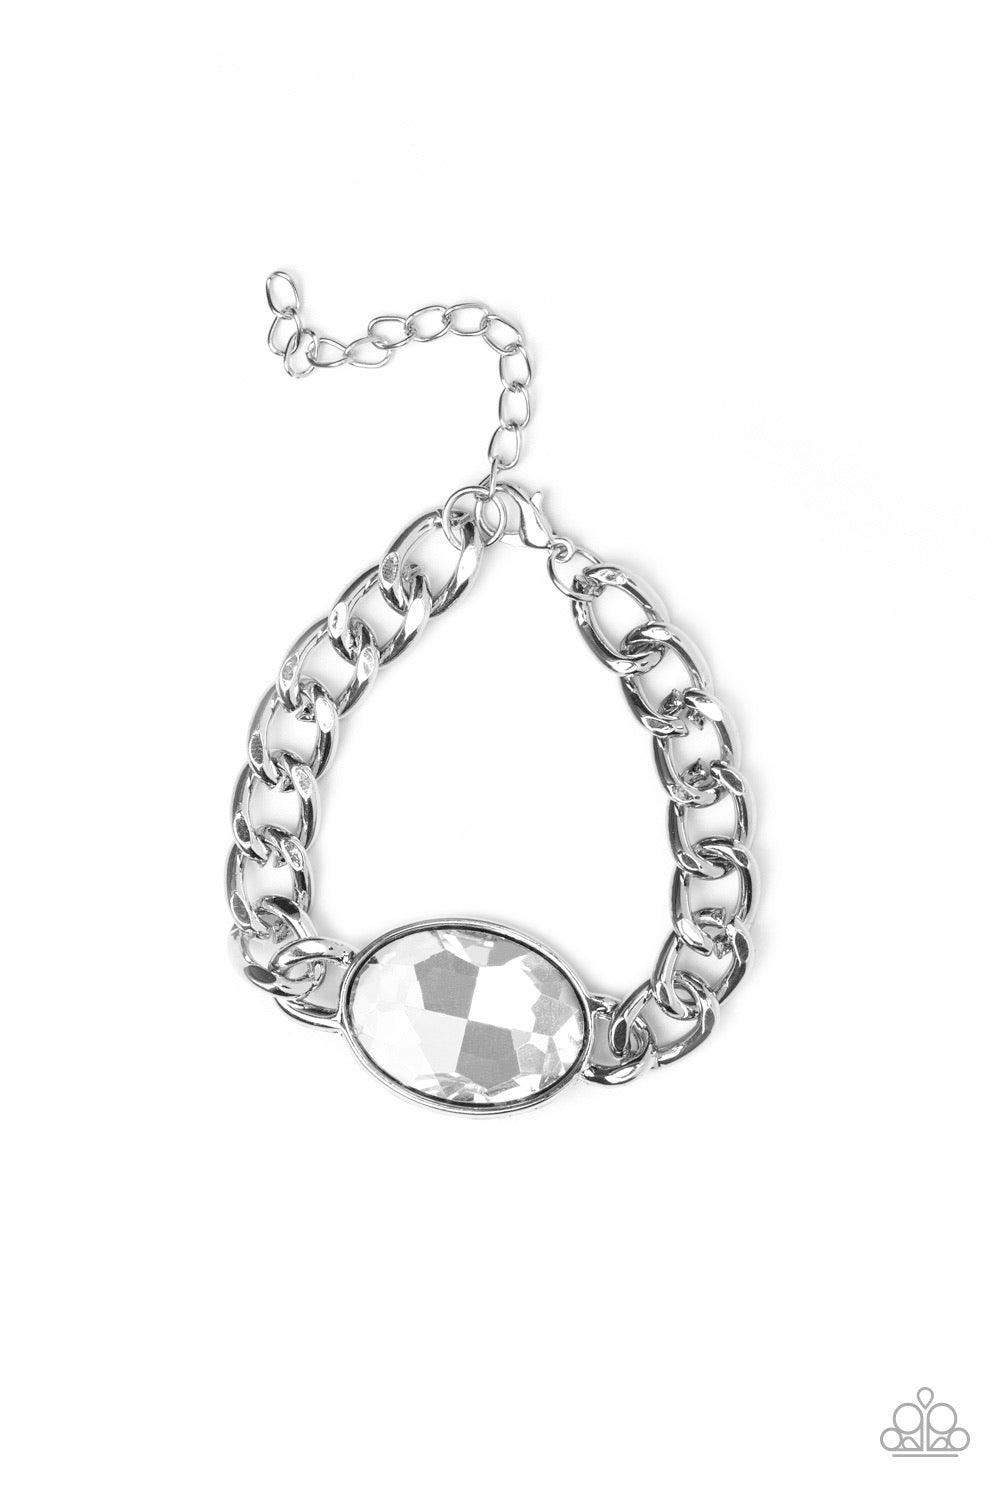 Paparazzi Accessories Luxury Lush - White An oversized white gem attaches to a bold silver chain, creating a dramatic centerpiece atop the wrist. Features an adjustable clasp closure. Jewelry